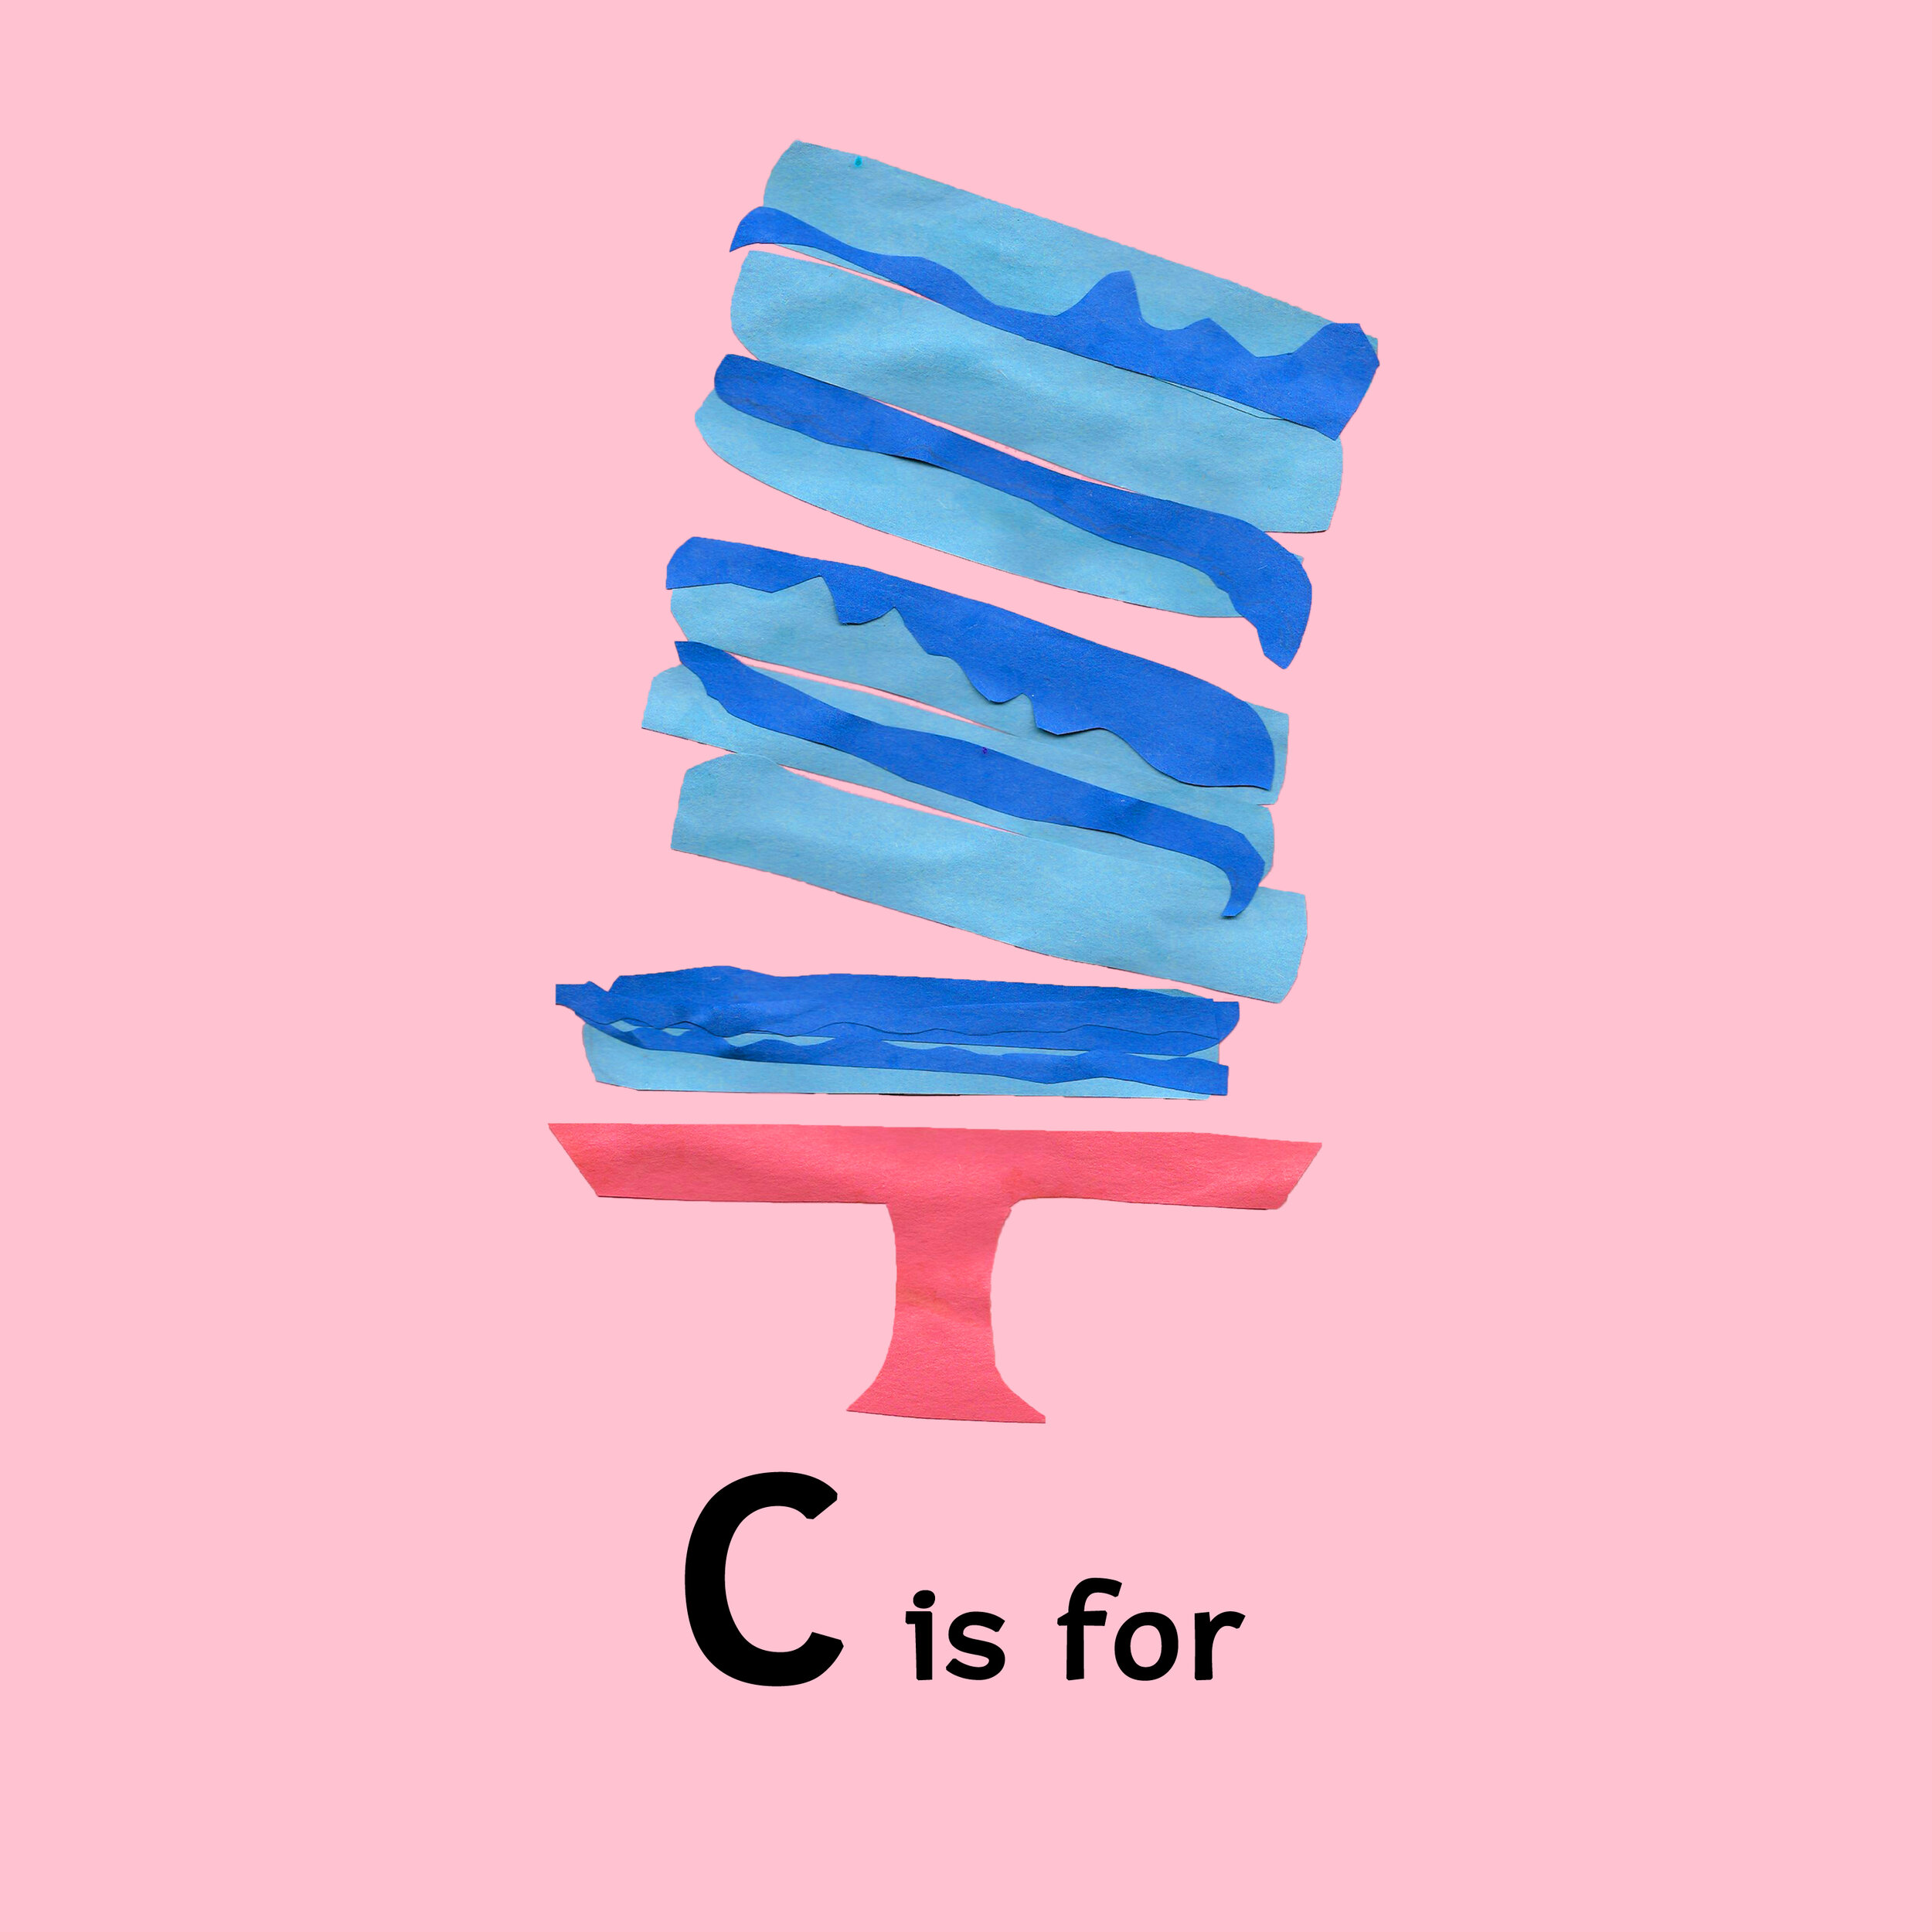 C is for.jpg